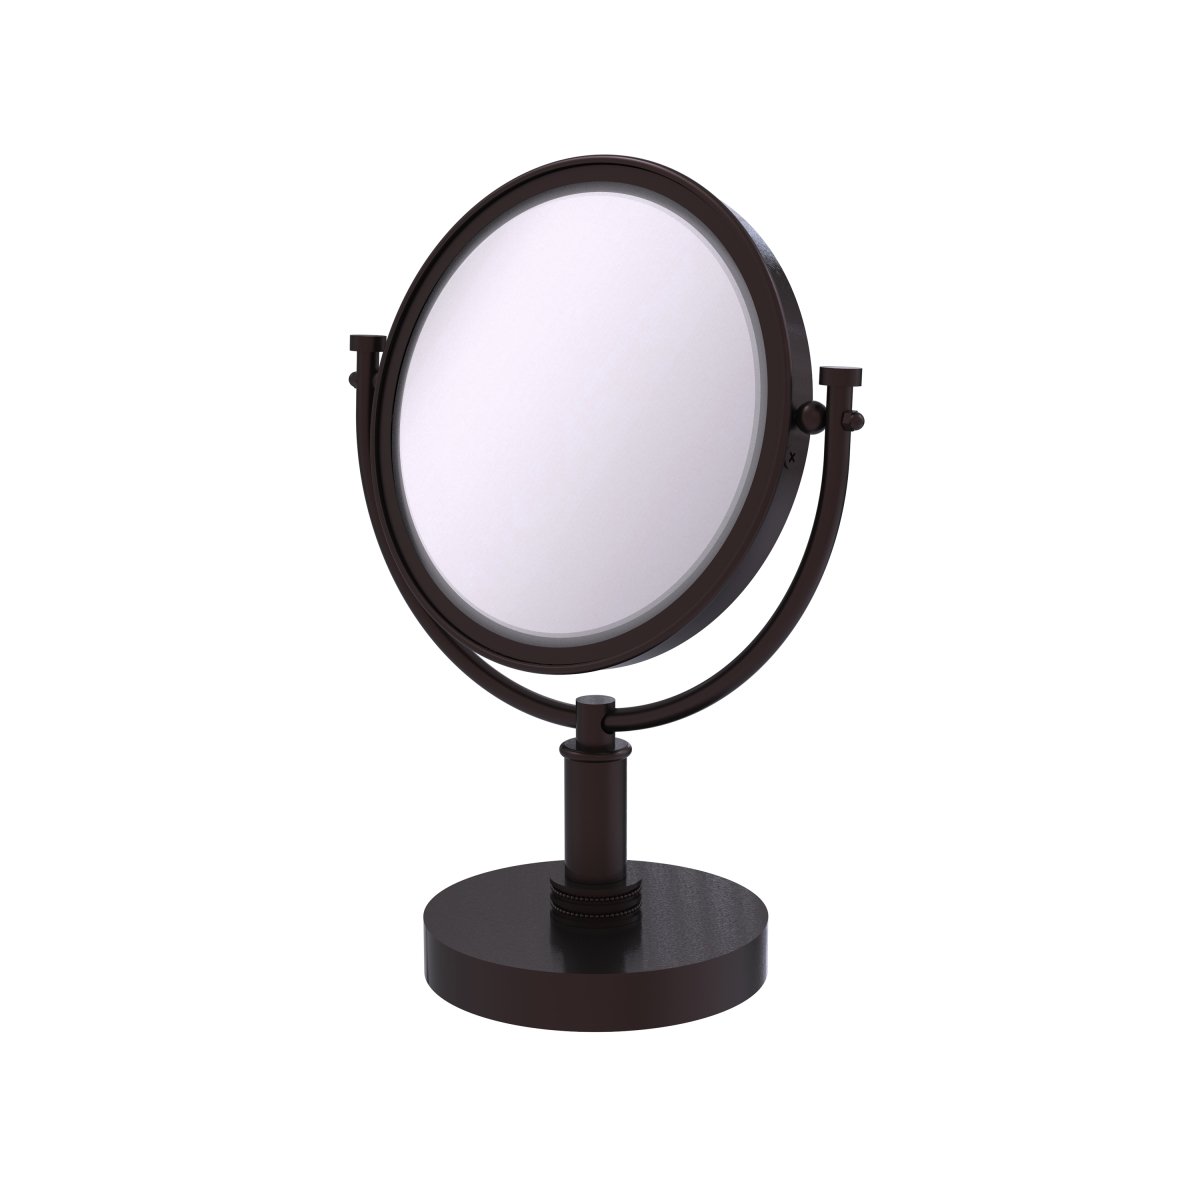 Dm-4d-4x-abz Dotted Ring Style 8 In. Vanity Top Make-up Mirror 4x Magnification, Antique Bronze